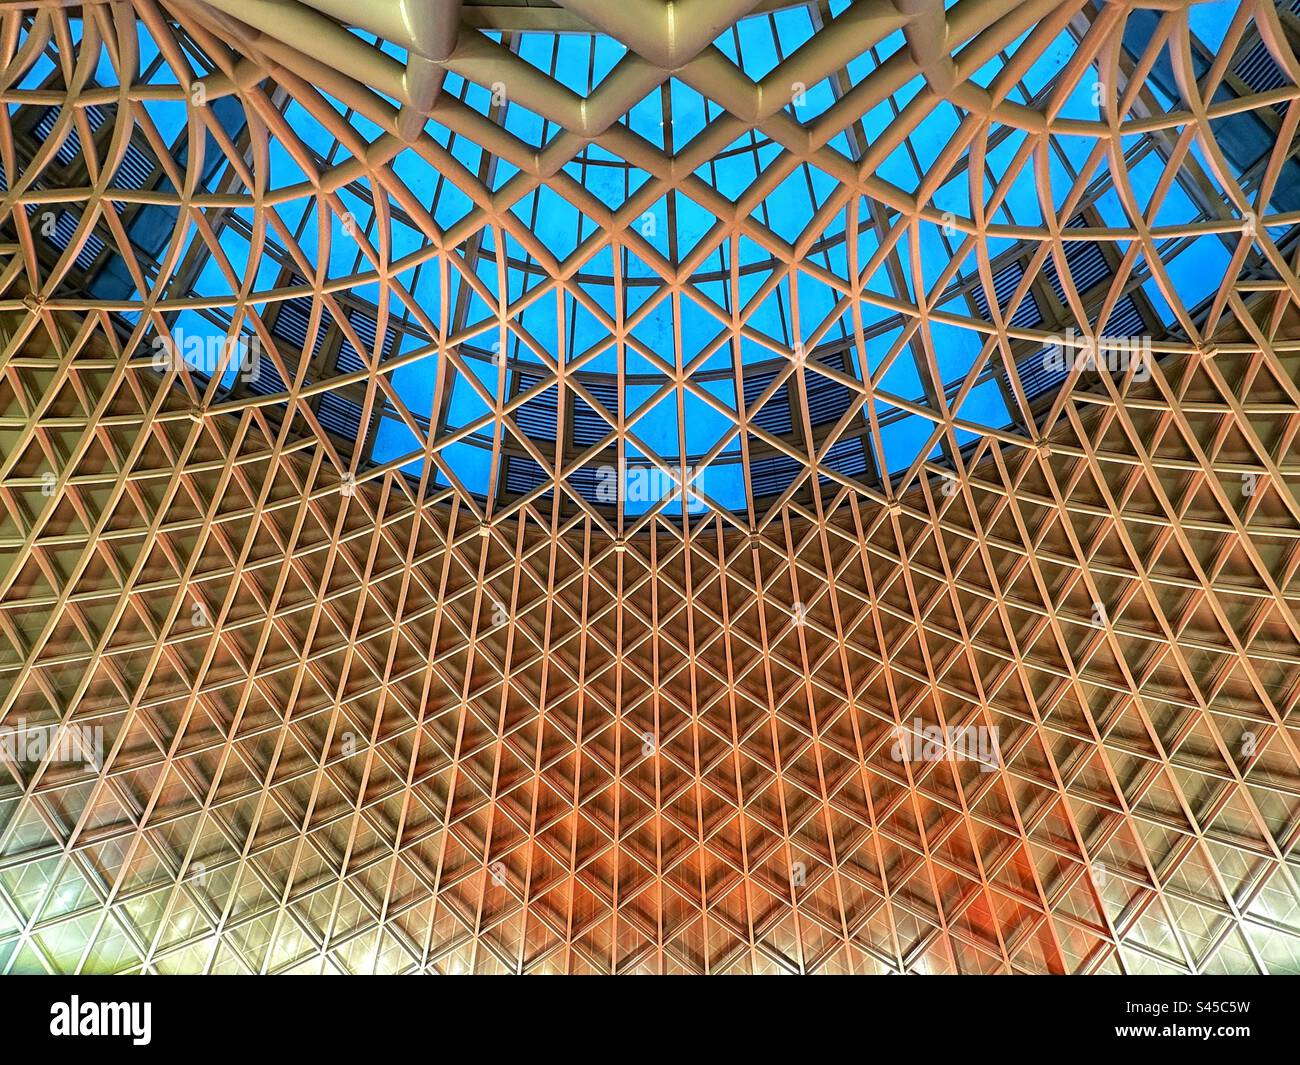 Interior view of the roof architecture of King’s Cross railway station in central London. No people. Stock Photo